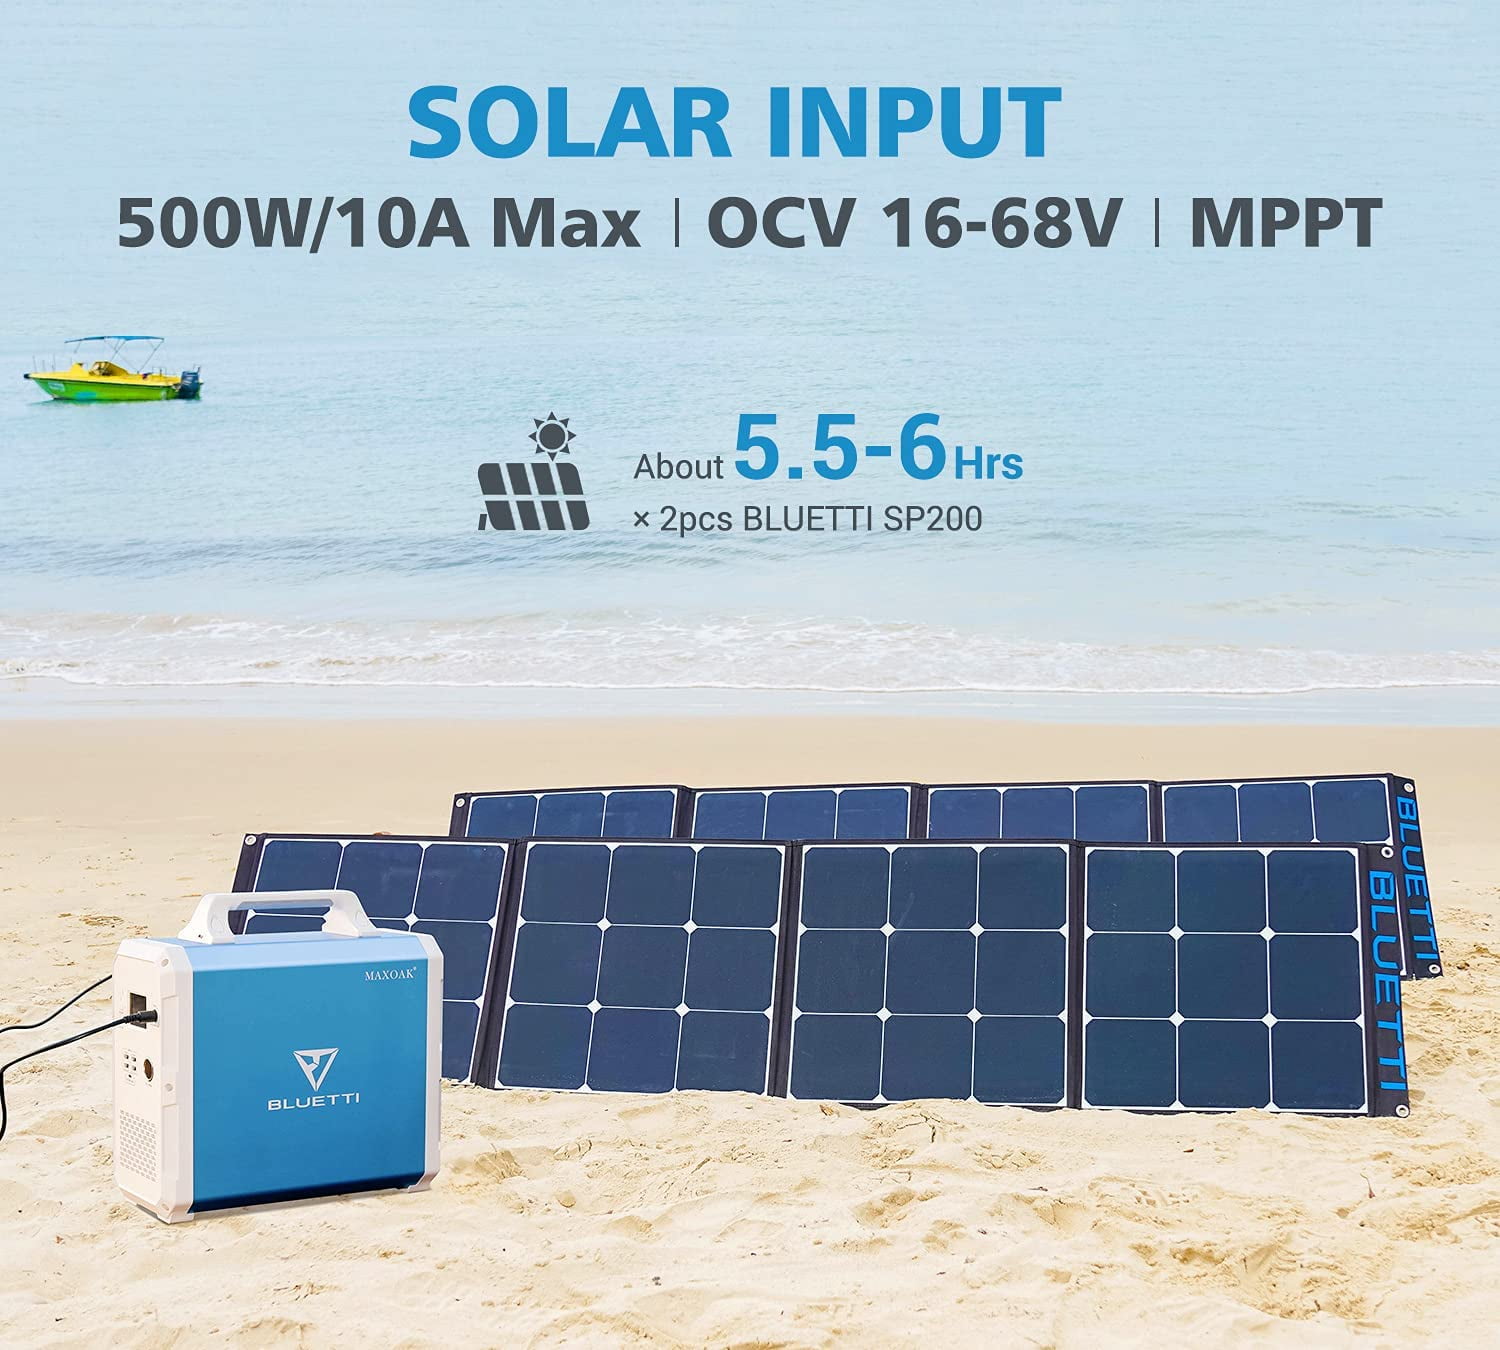 MAXOAK Portable Power Station BLUETTI EB150 1500Wh AC110V/1000W Camping Solar Generator Lithium Emergency Battery Backup with 2 AC outlet Pure Sinewave,DC12V,USB-C for Outdoor Road Trip Travel Fishing 